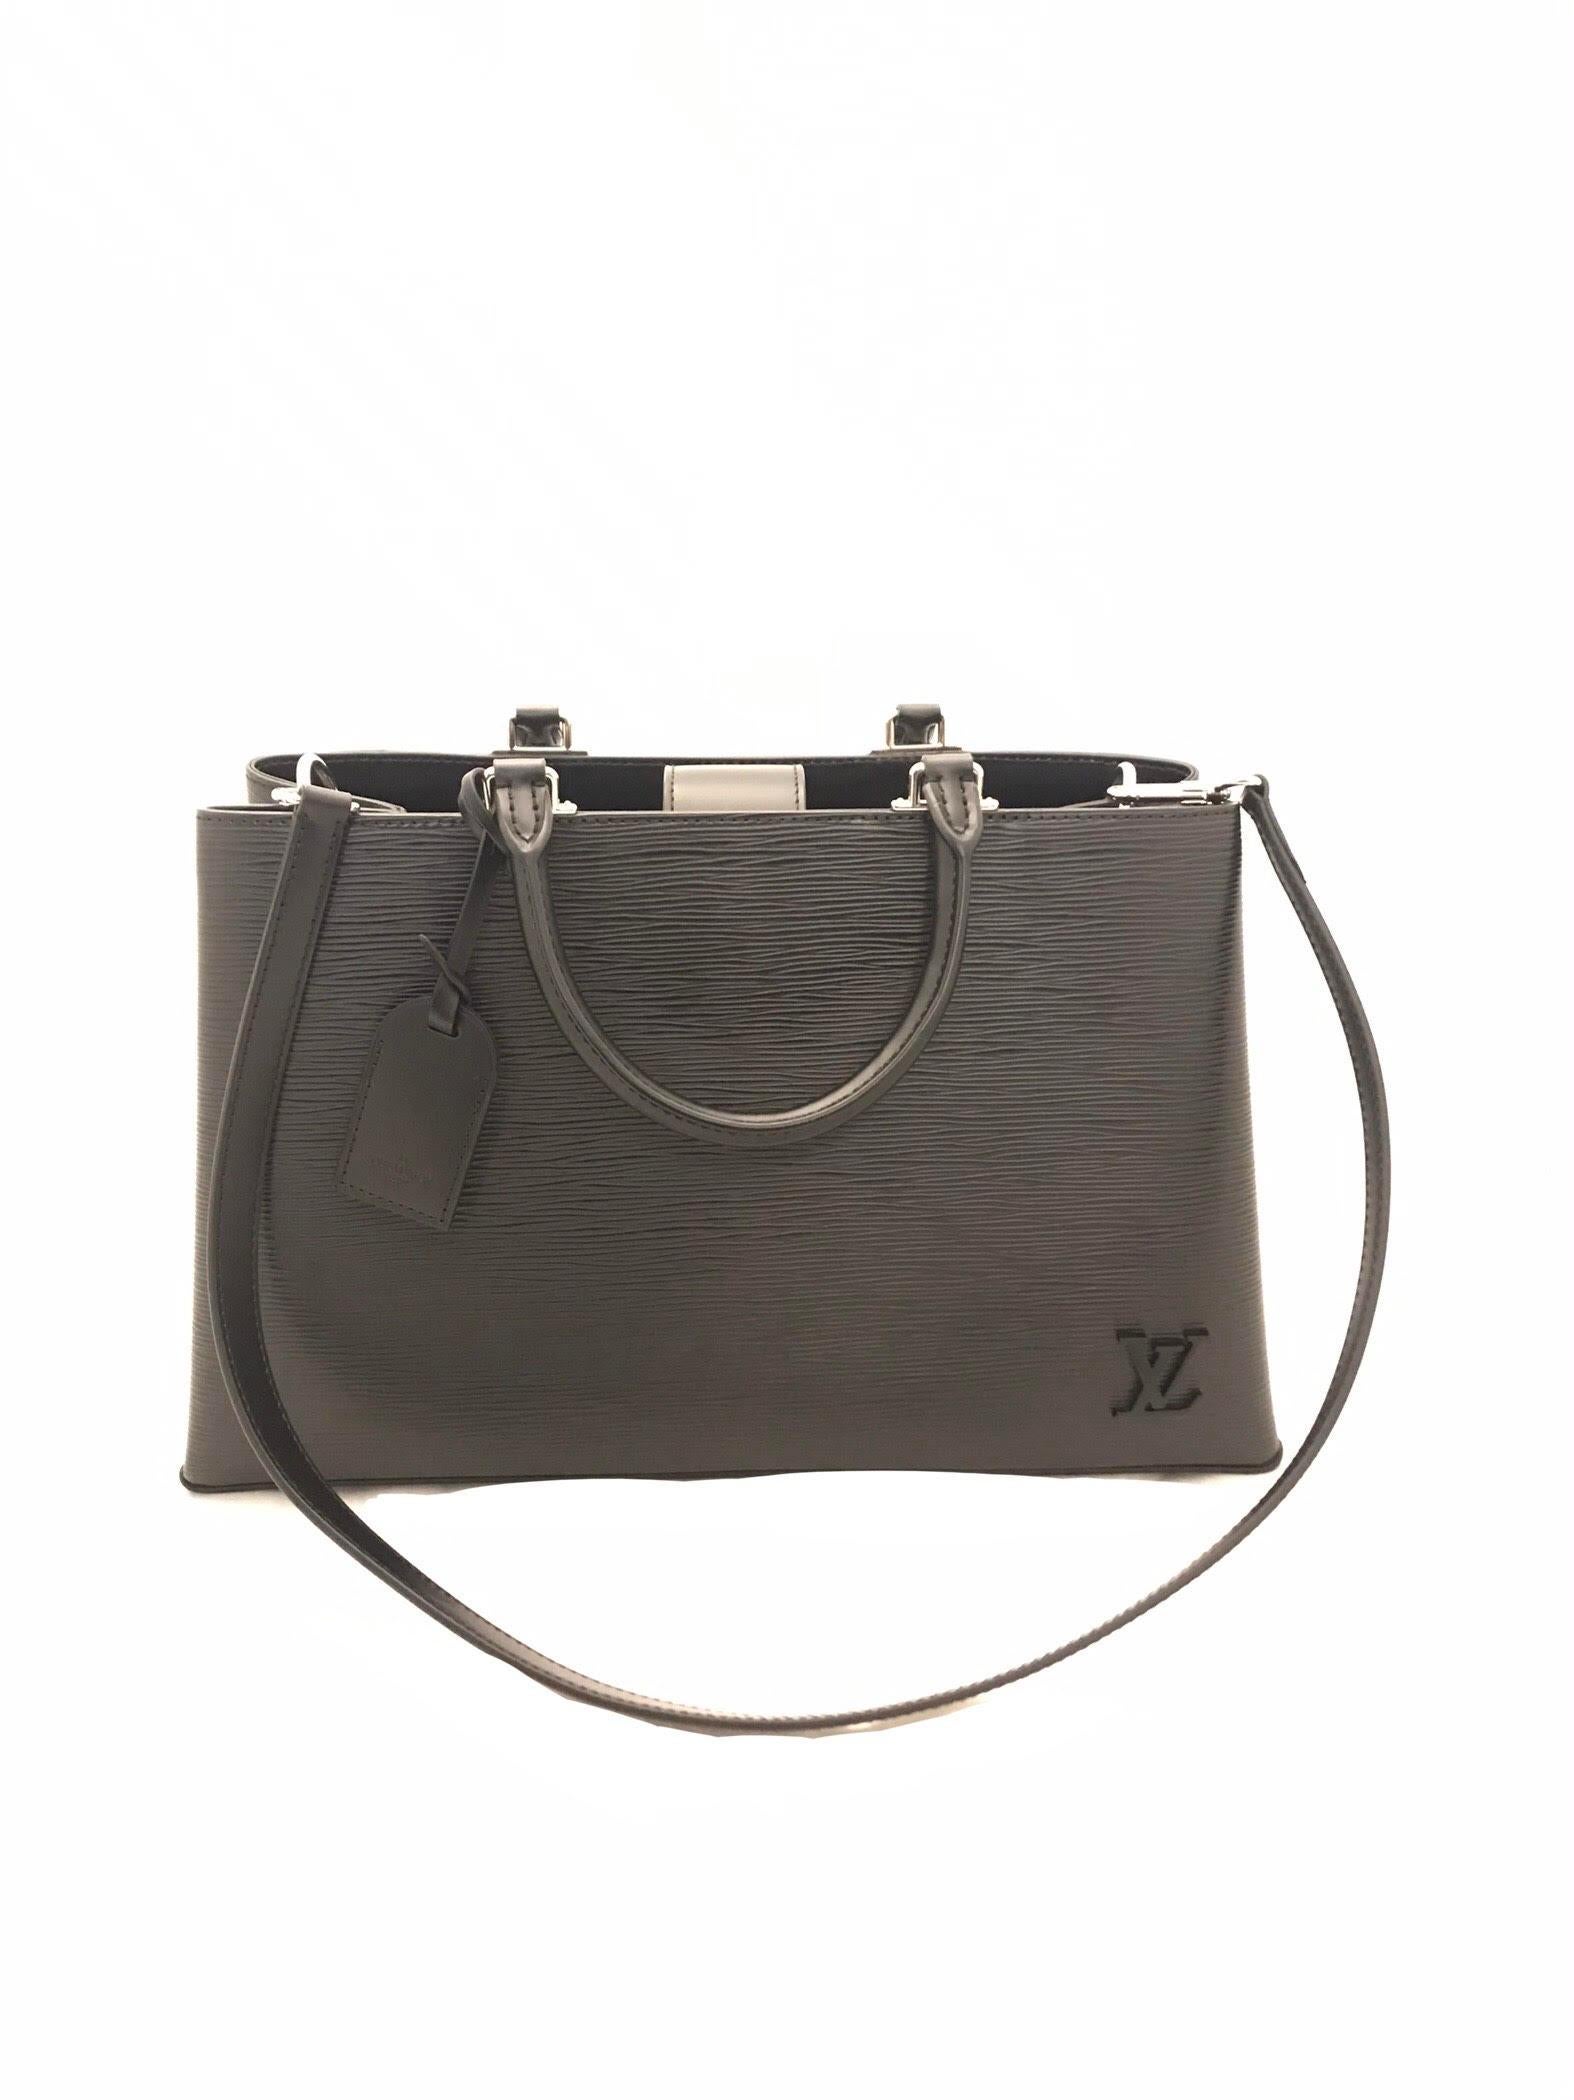 Vaneau GM black Epi leather handbag from Louis Vuitton. Double rolled leather top handles, removable shoulder strap and silver toned hardware. In signature Louis Vuitton black Epi leather with smooth leather trim, open slip pocket and luggage tag